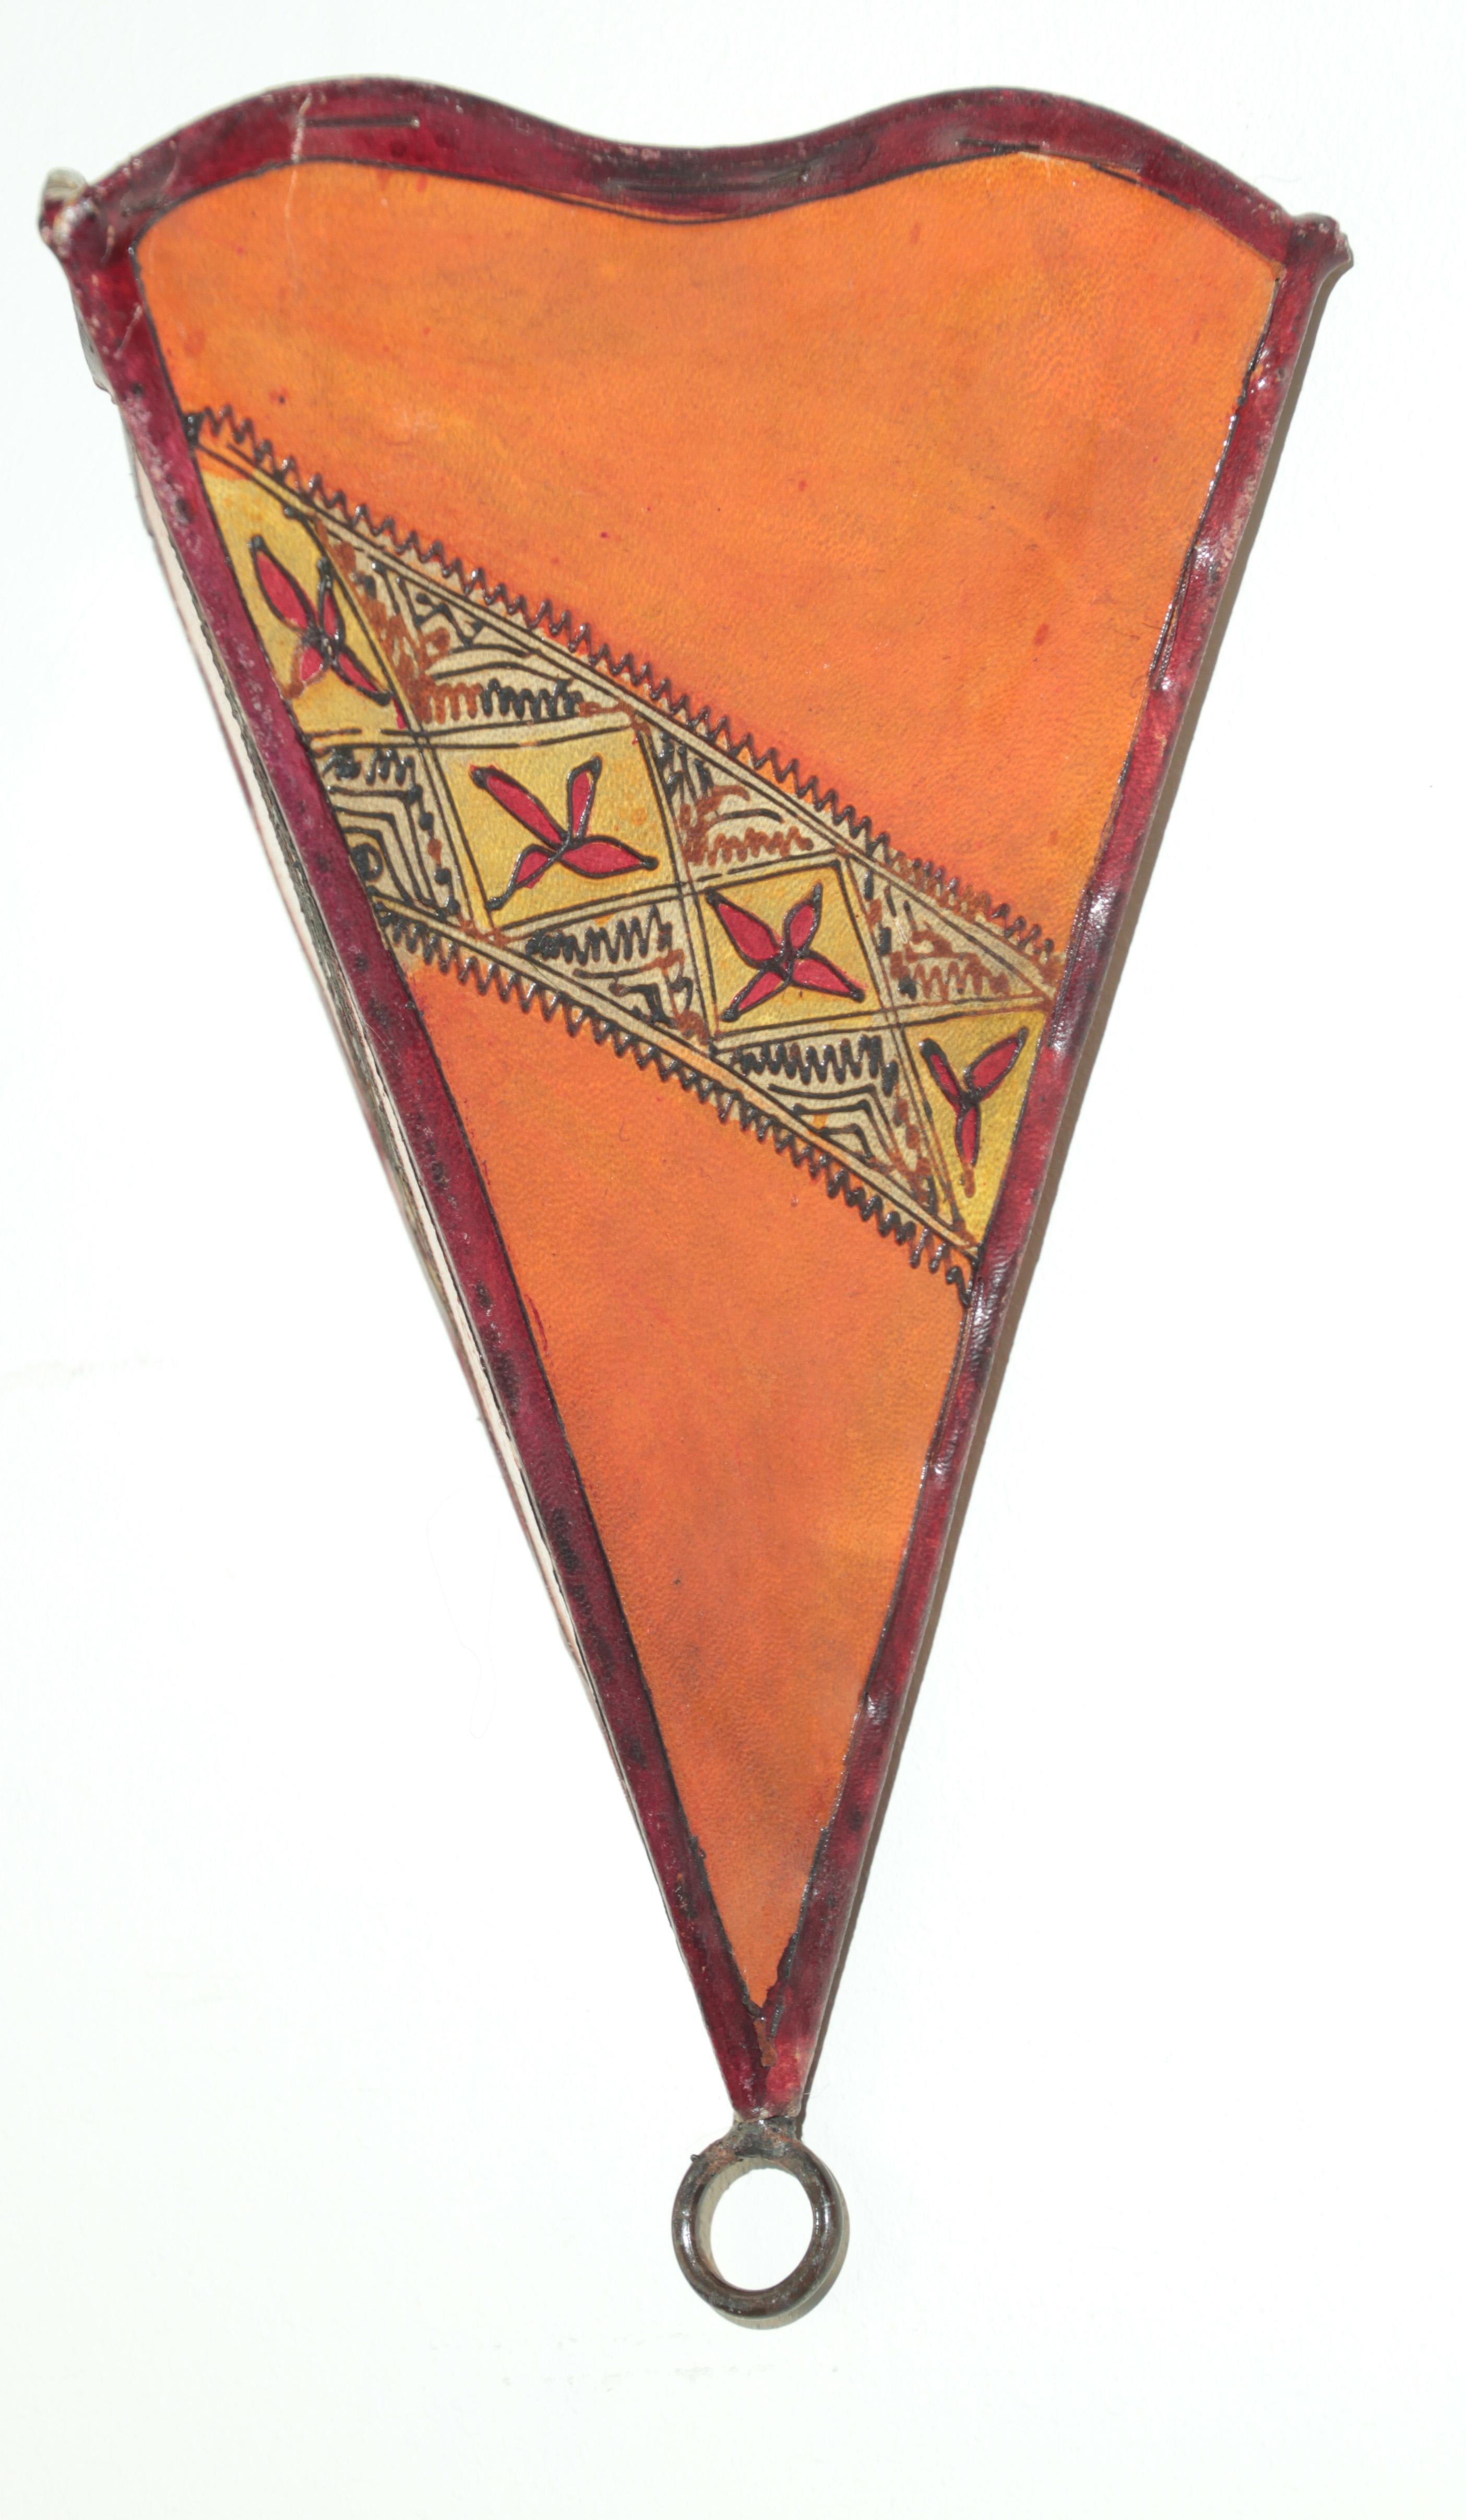 African Tribal Art parchment wall shade sconce featuring a large triangle hide form stitched on iron and hand painted surface.
These Moroccan Art pieces could be used as wall lamp shade.
Iron frame covered with hide parchment which has been hand